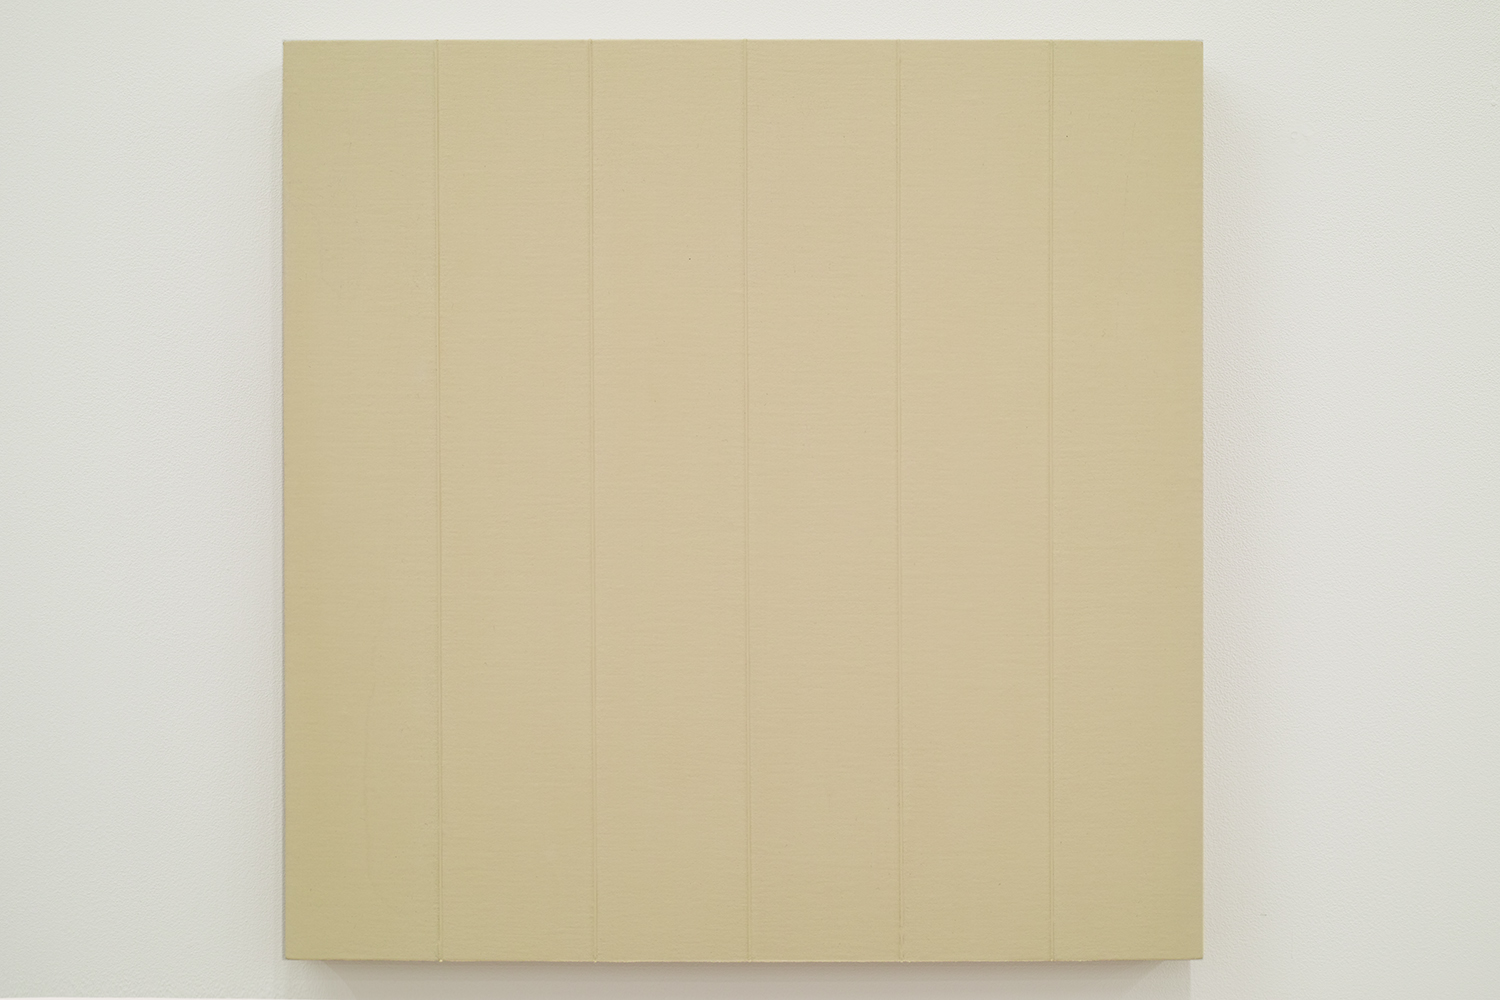 TS0711 ｜Gesso on linen on panel｜46 x 46 cm｜2007